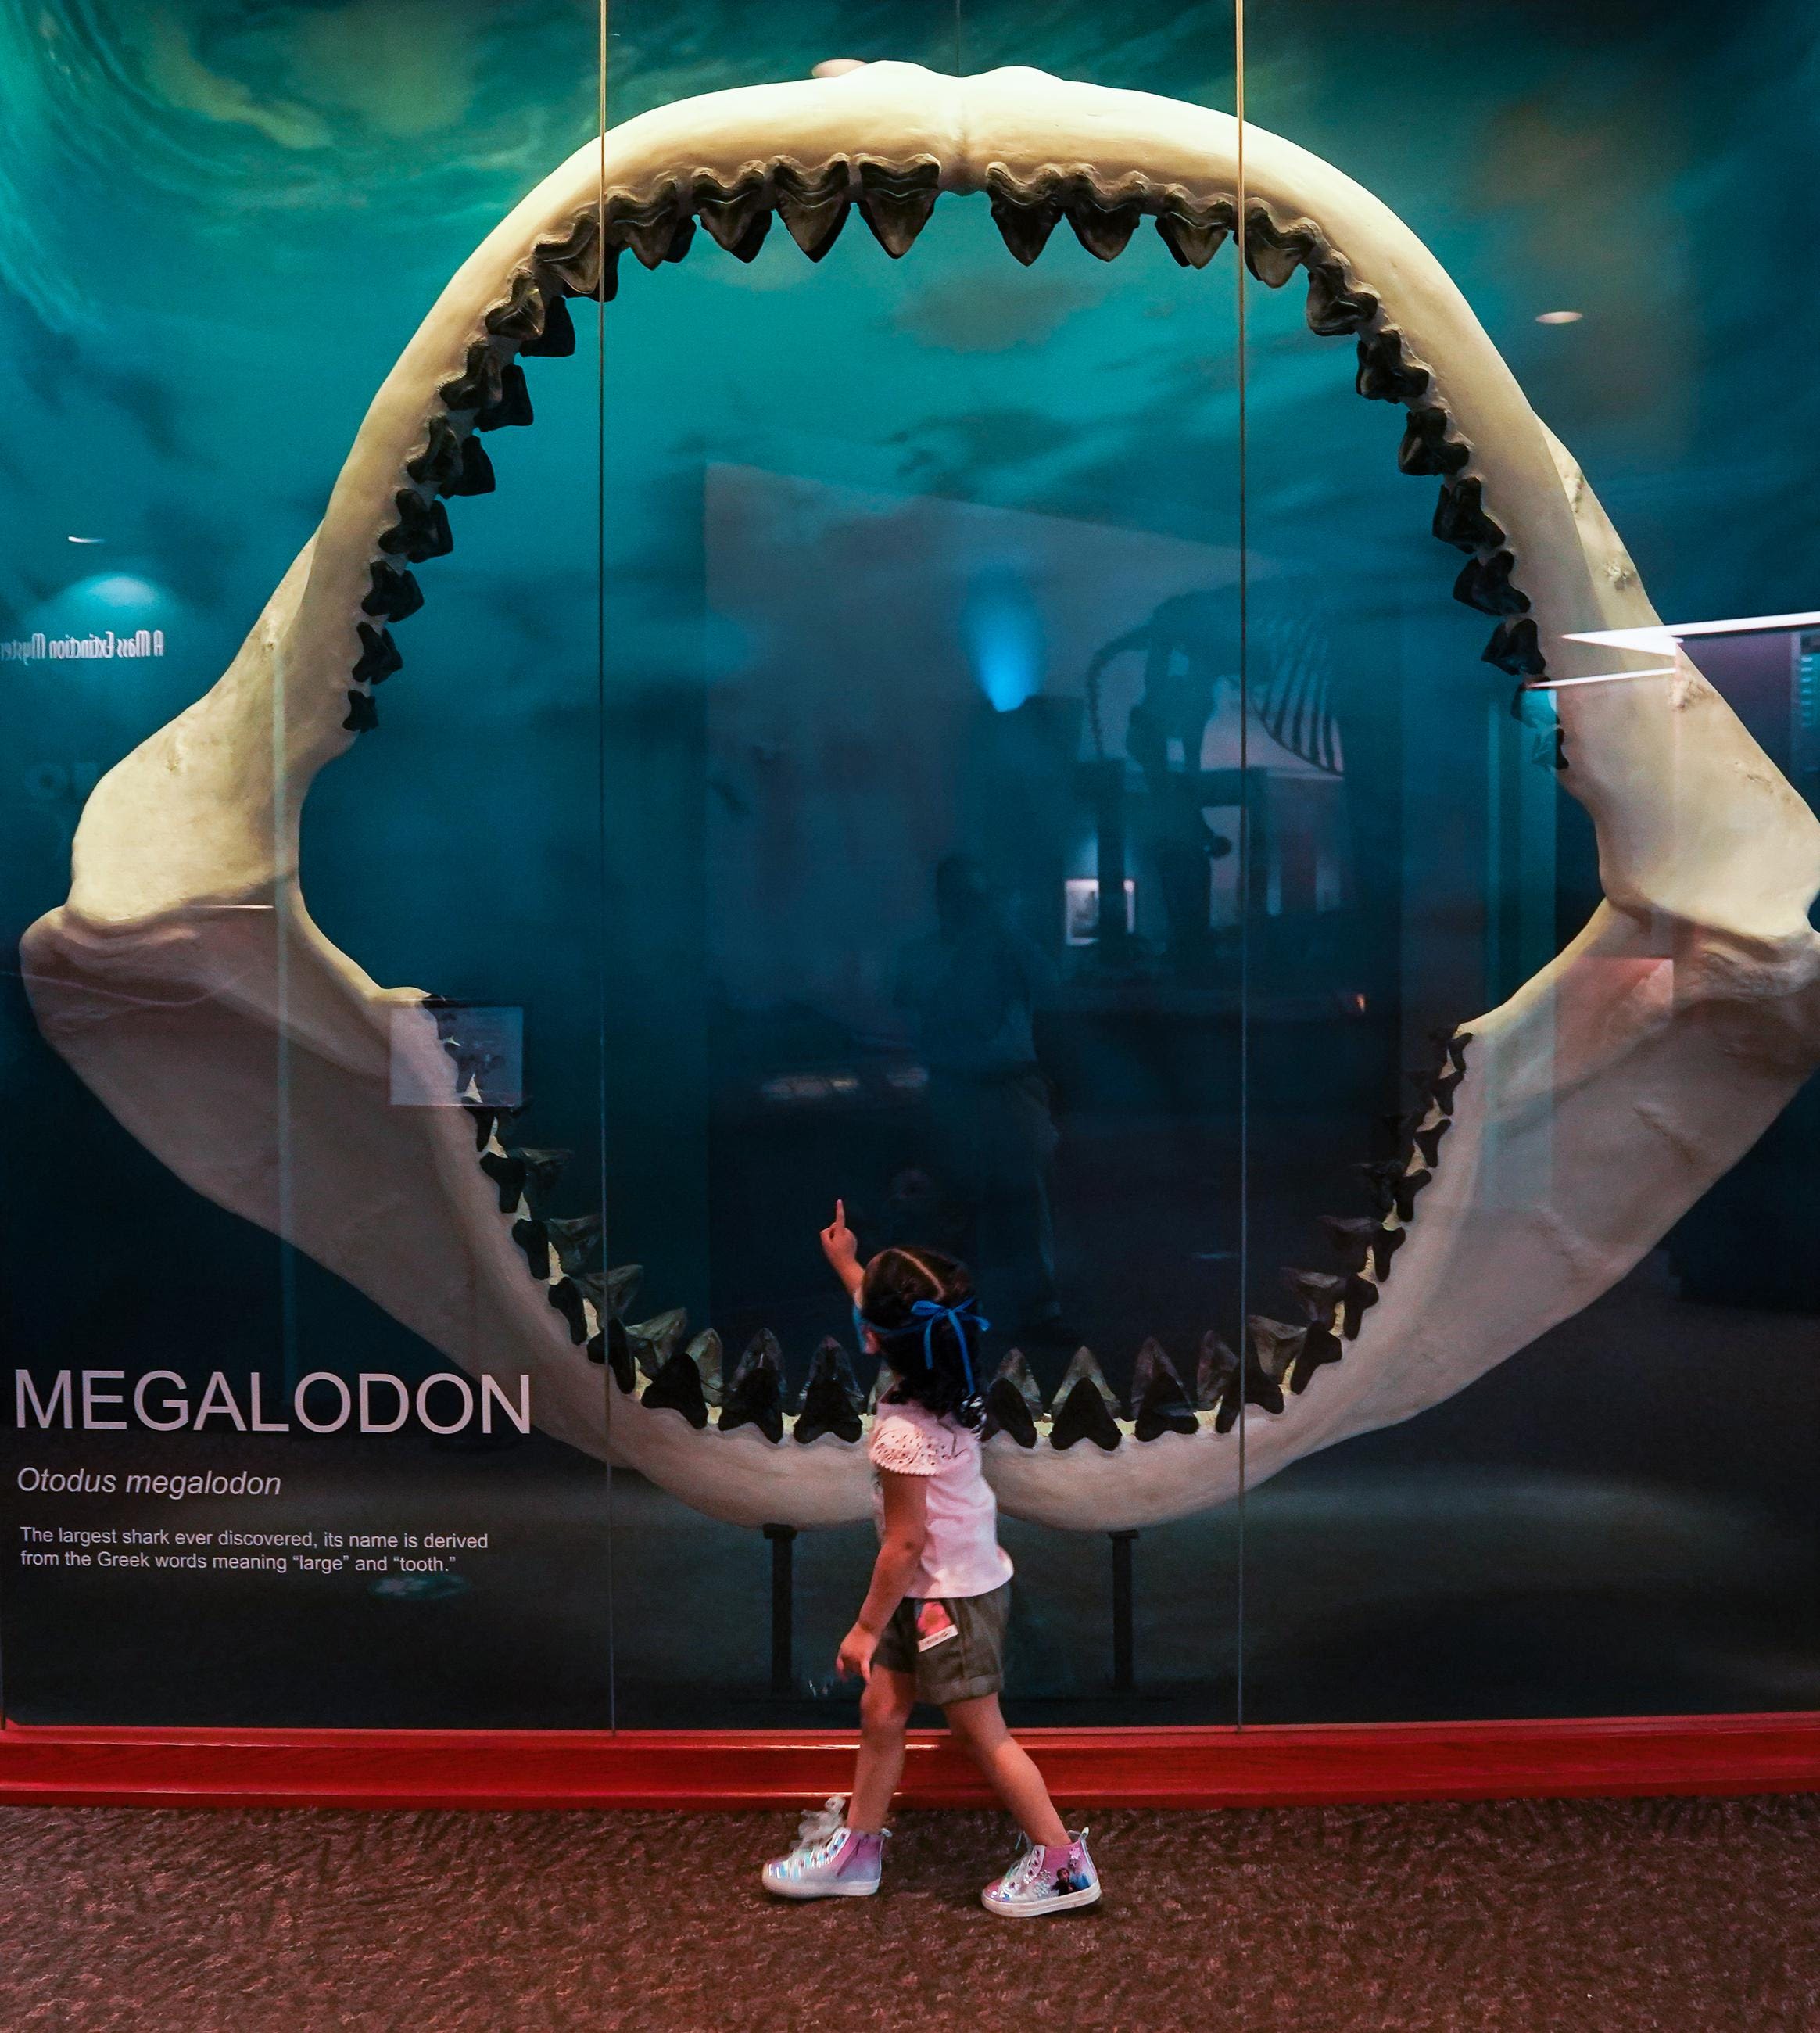 Teeth on the beach: Search for megalodon teeth in South Carolina on Memorial Day weekend